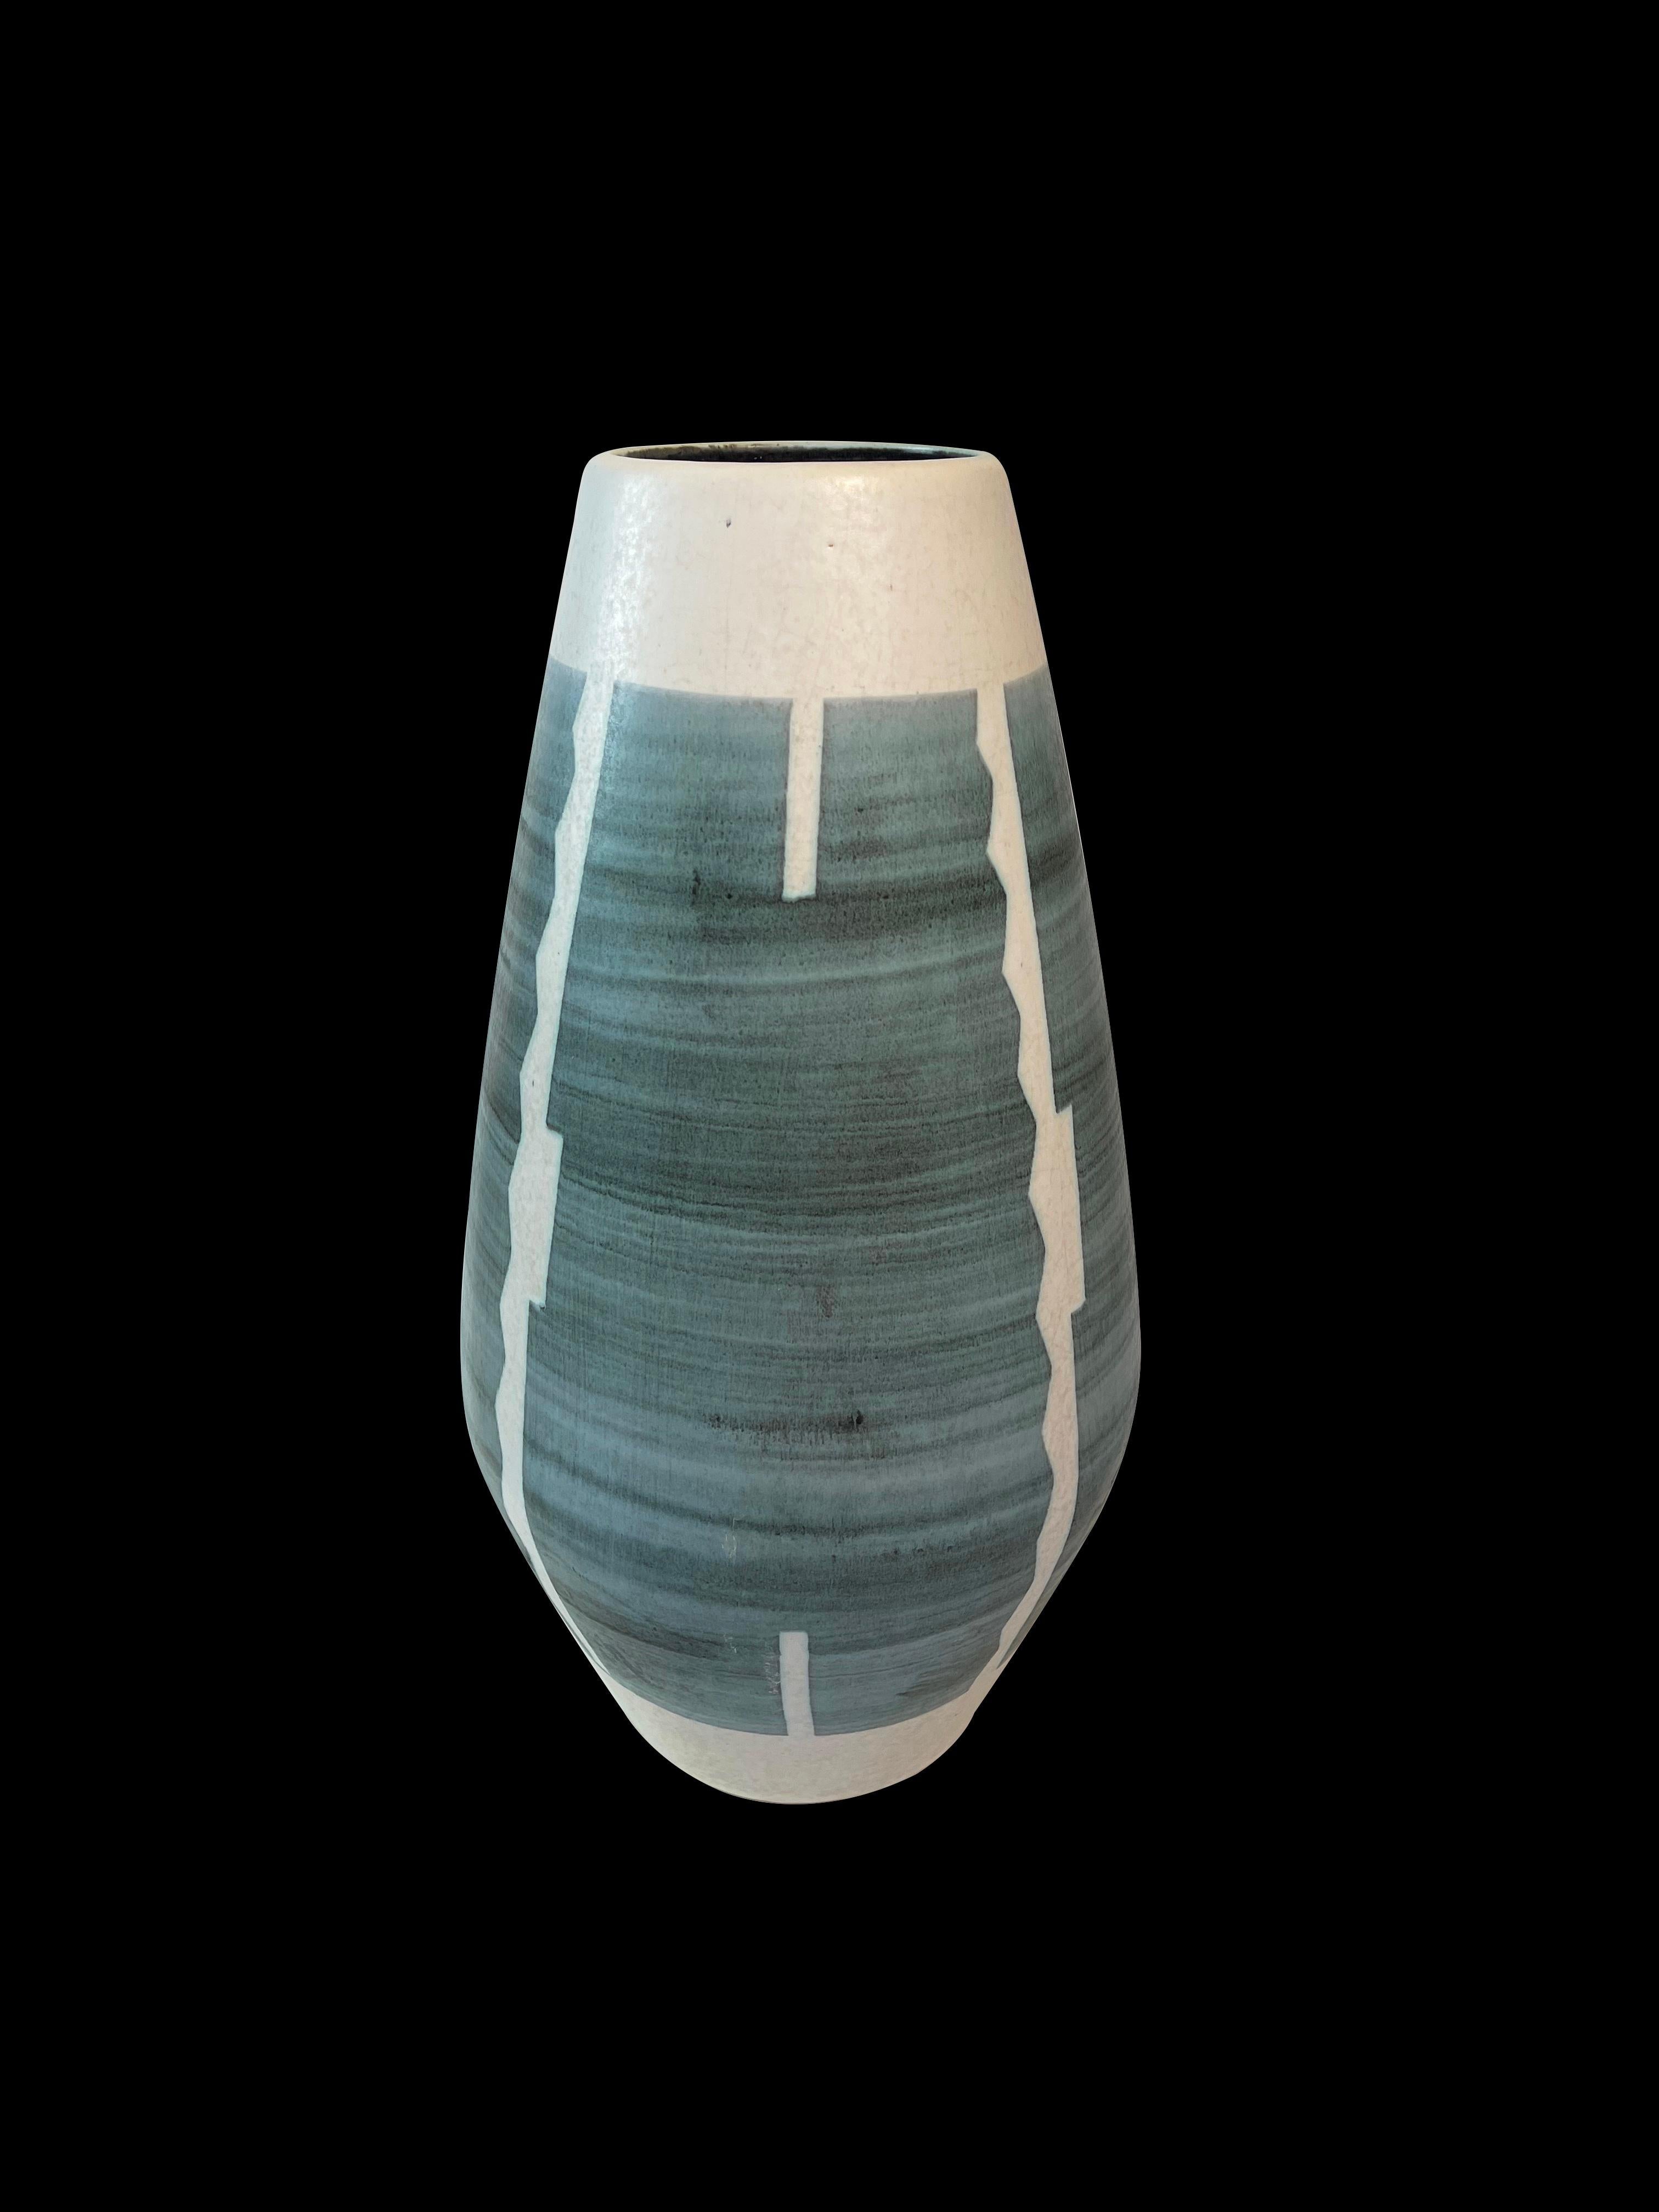 Large impressive mid-century floor vase from ceramic by then West-German pottery makers Fohr.
This vase features modernist patterns inspired by African ethnic designs.
Here on a light beige/grey base colour the greyish blue glaze: obviously spared